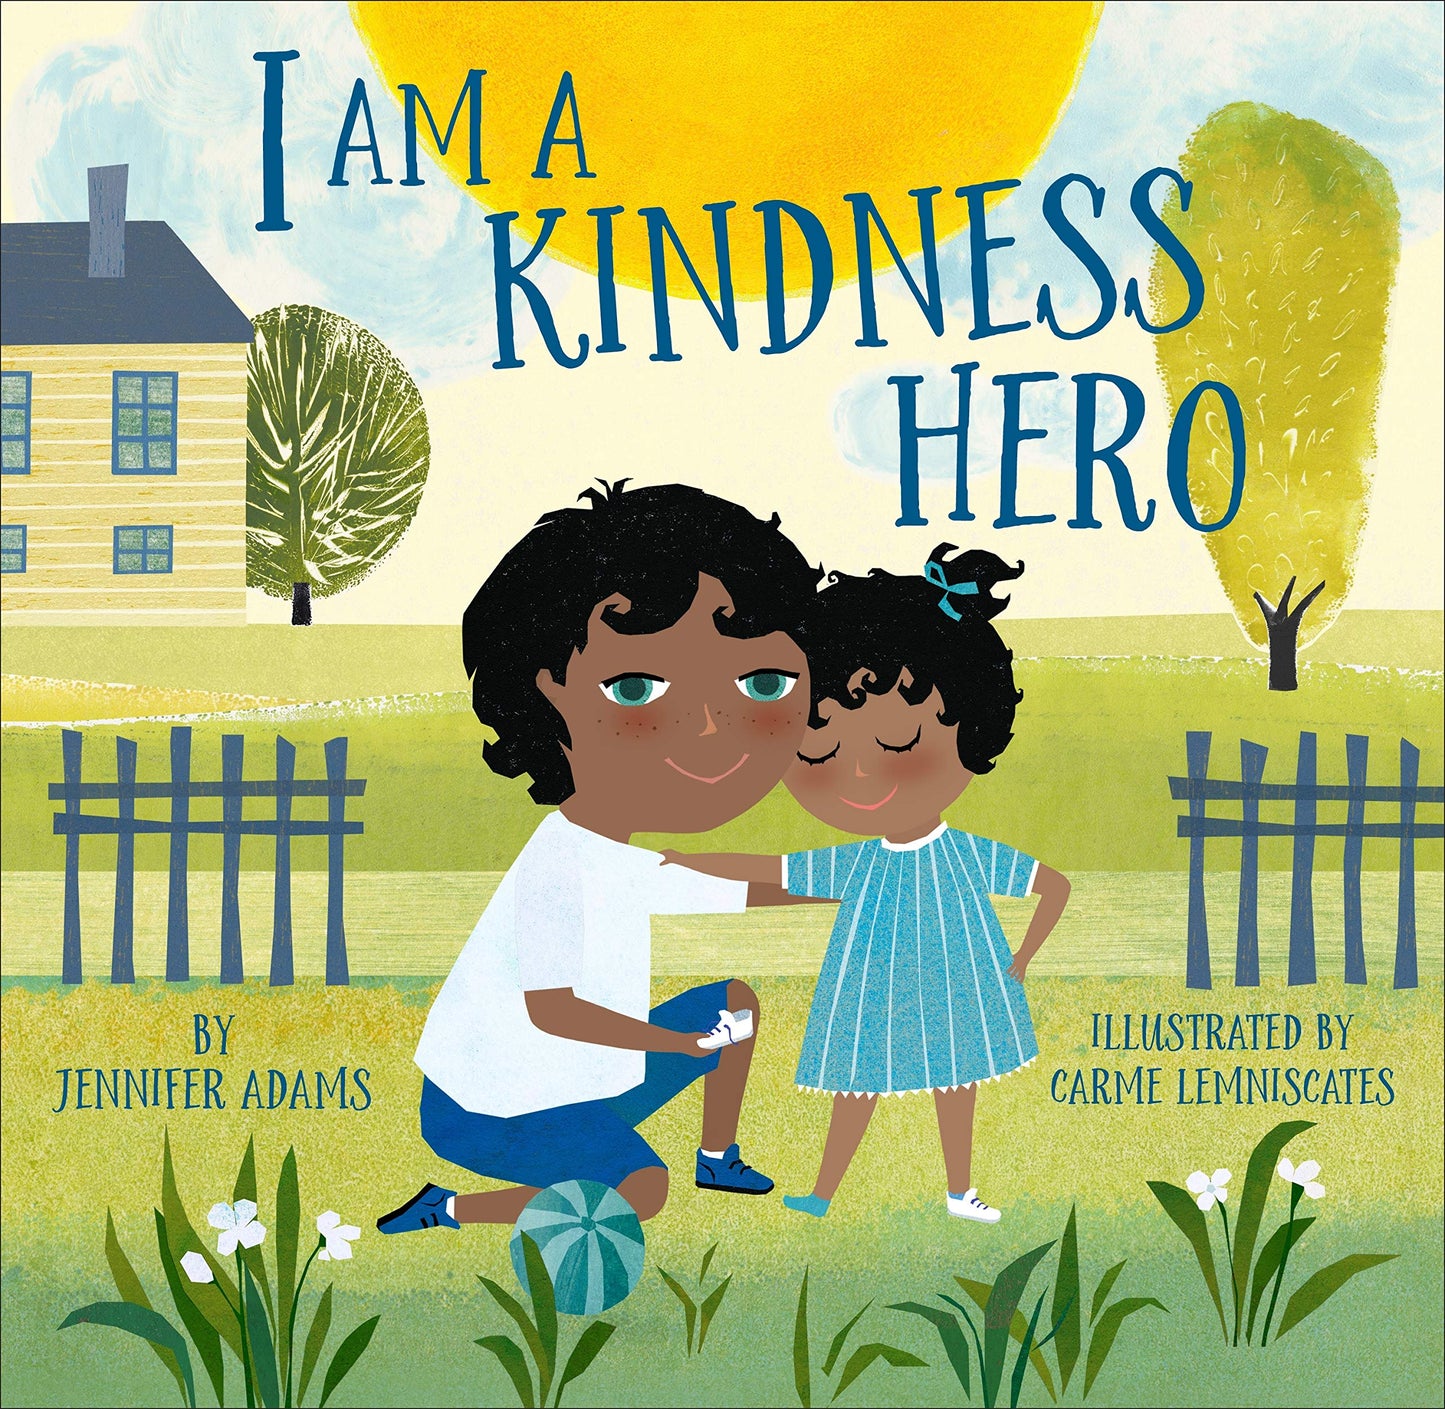 I am a Kindness Hero by Jennifer Adams.  A young boy kneels down next to a small girl and helps to put her shoe on.  Both children are smiling. 